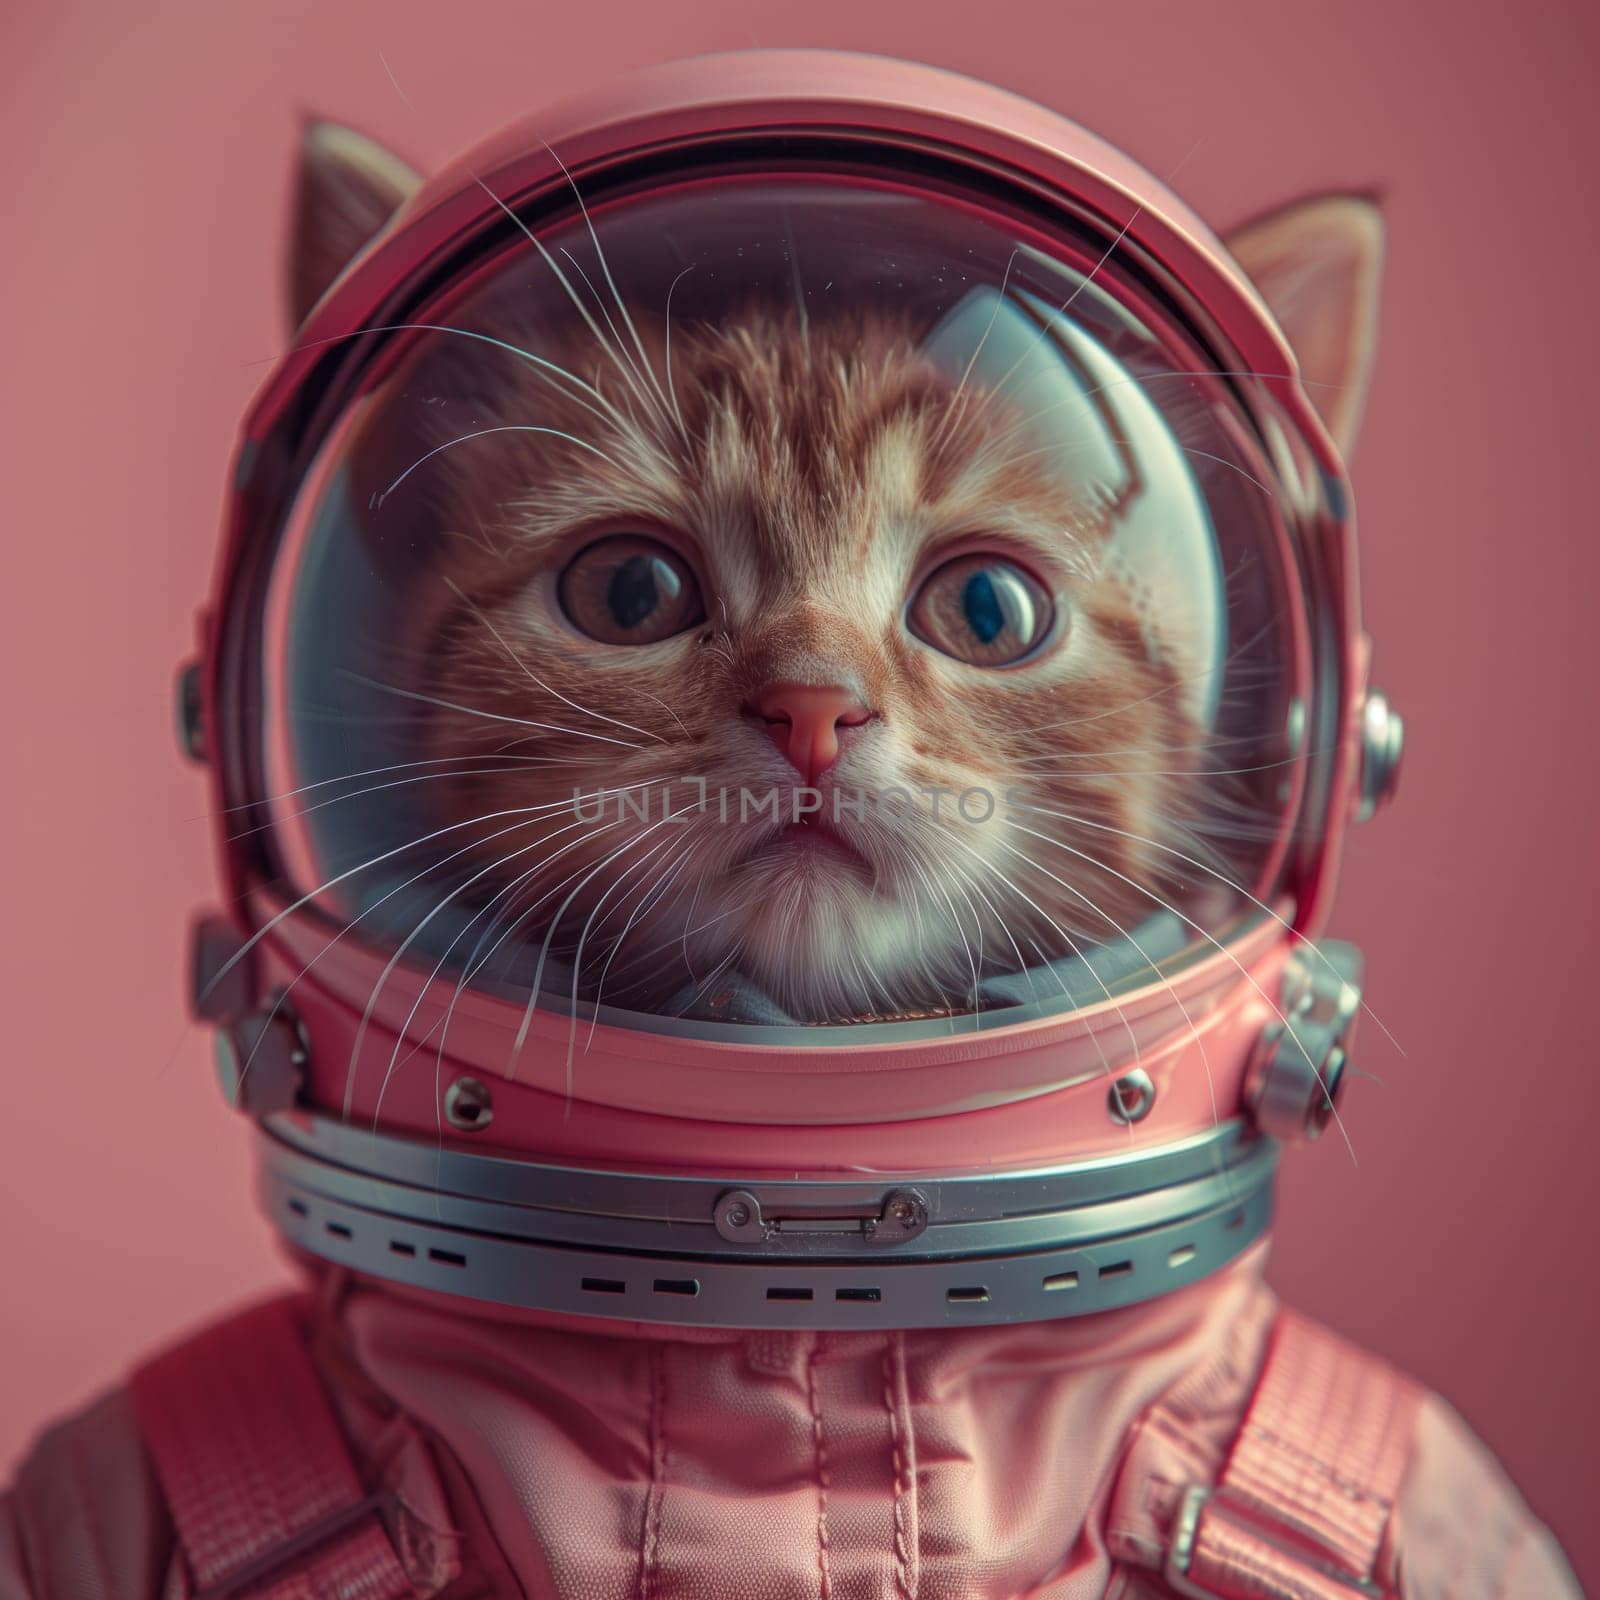 A Felidae wearing a pink space suit, helmet, with whiskers and a smile. Personal protective equipment as a fashion accessory for small to mediumsized cats